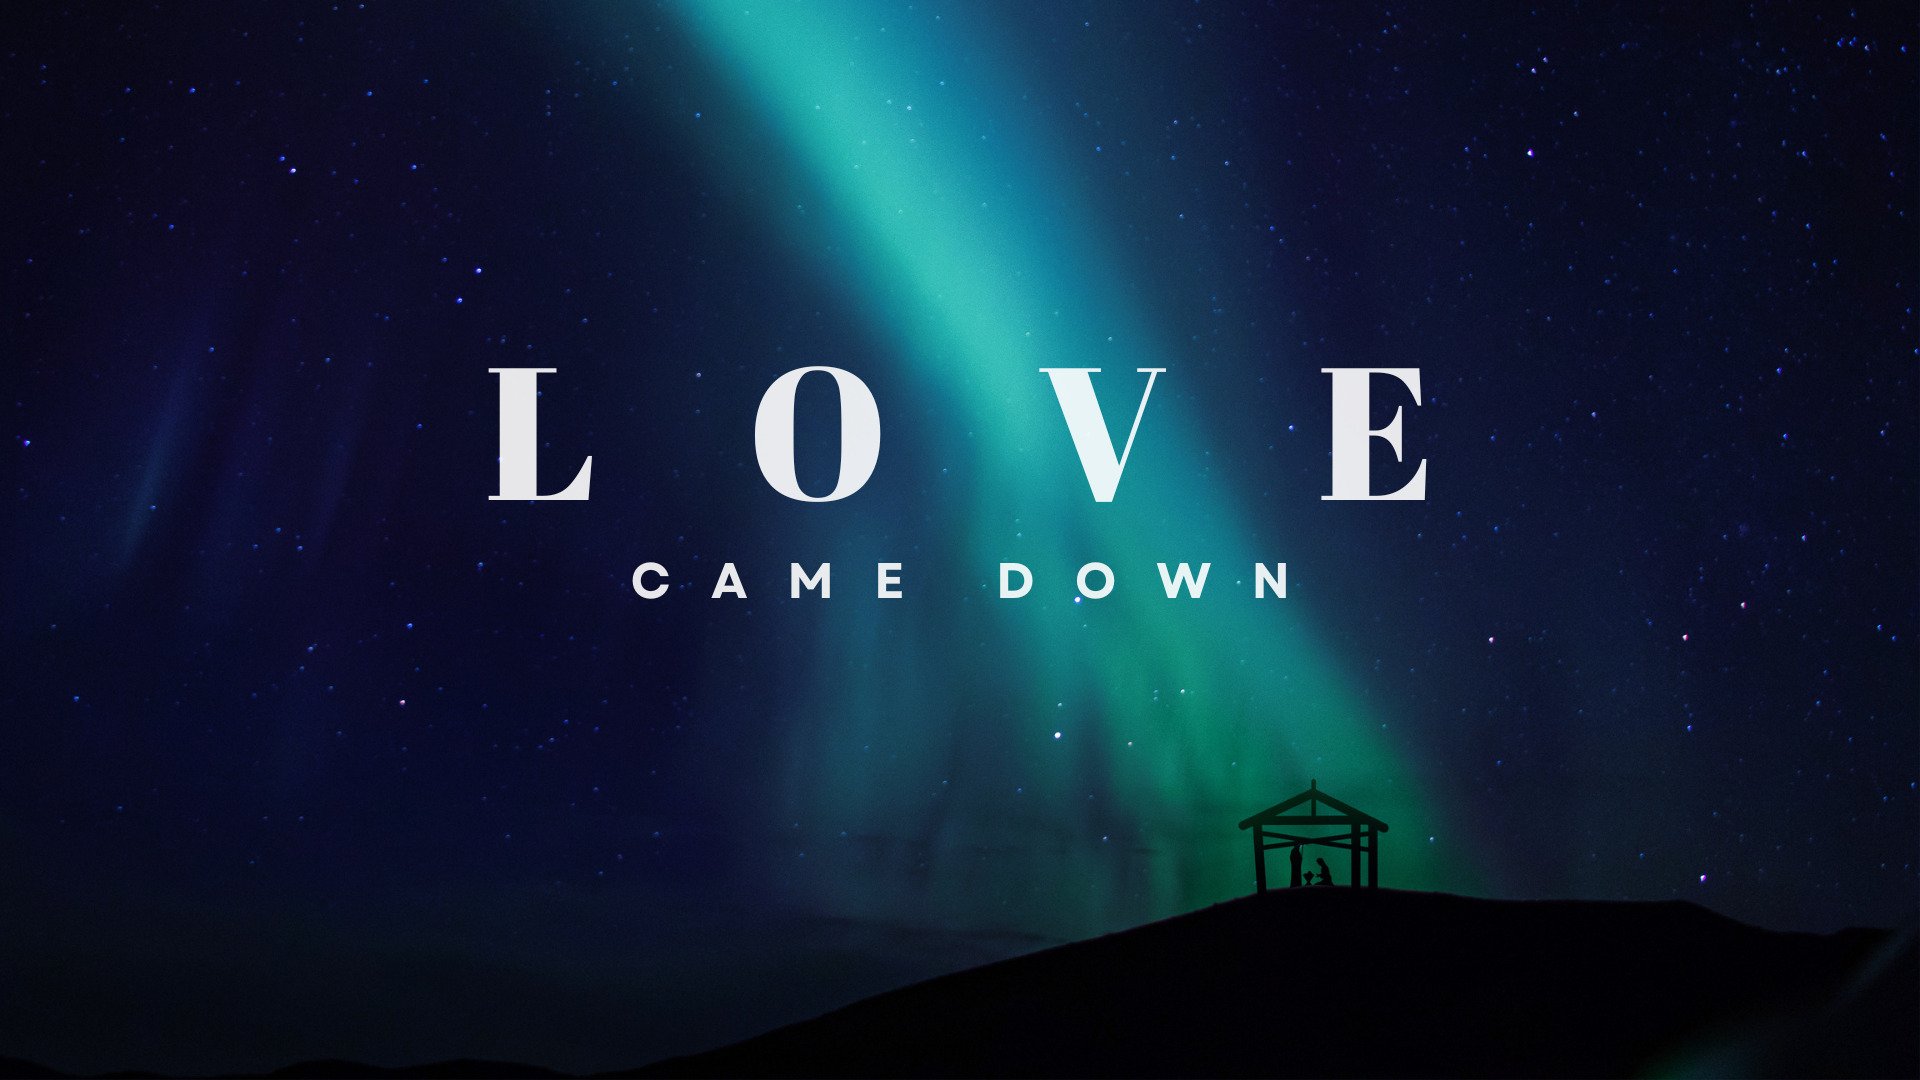 Love Came Down 4K 3840 × 2160 Px | Remix Church Media | Editable Design Templates And Resources Made For The Church.